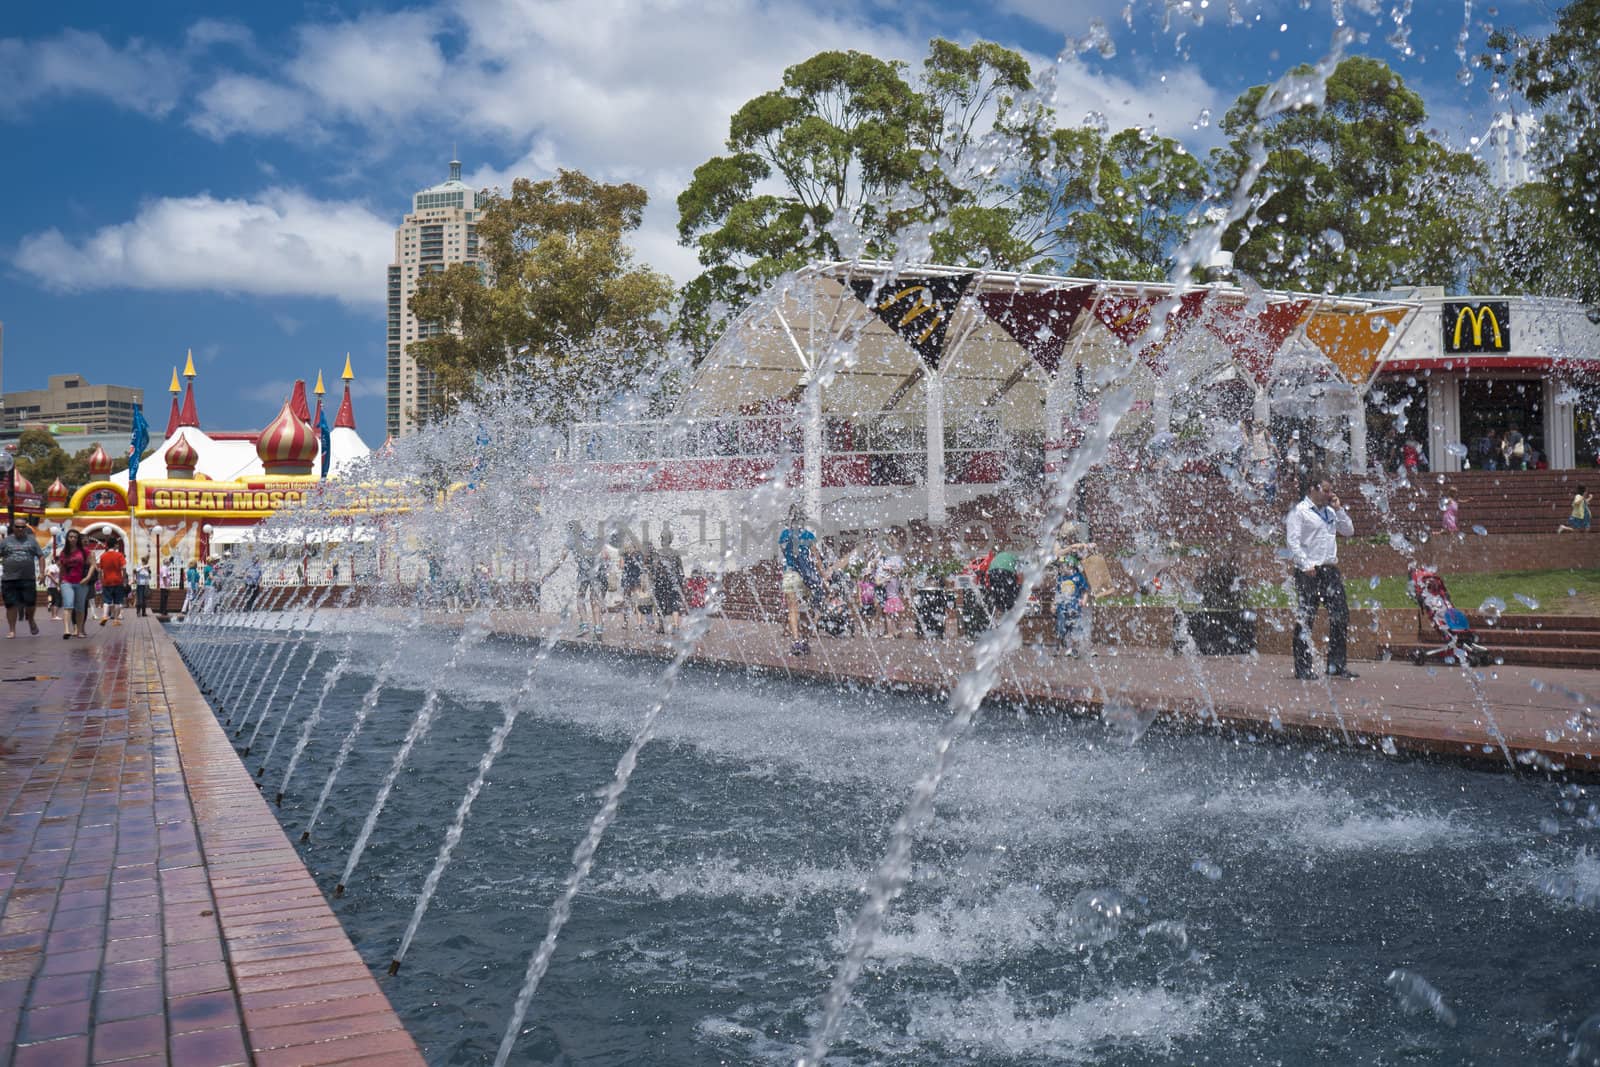 Waterfeature in Darling Harbour area, with Moscow Circus marquee in background.